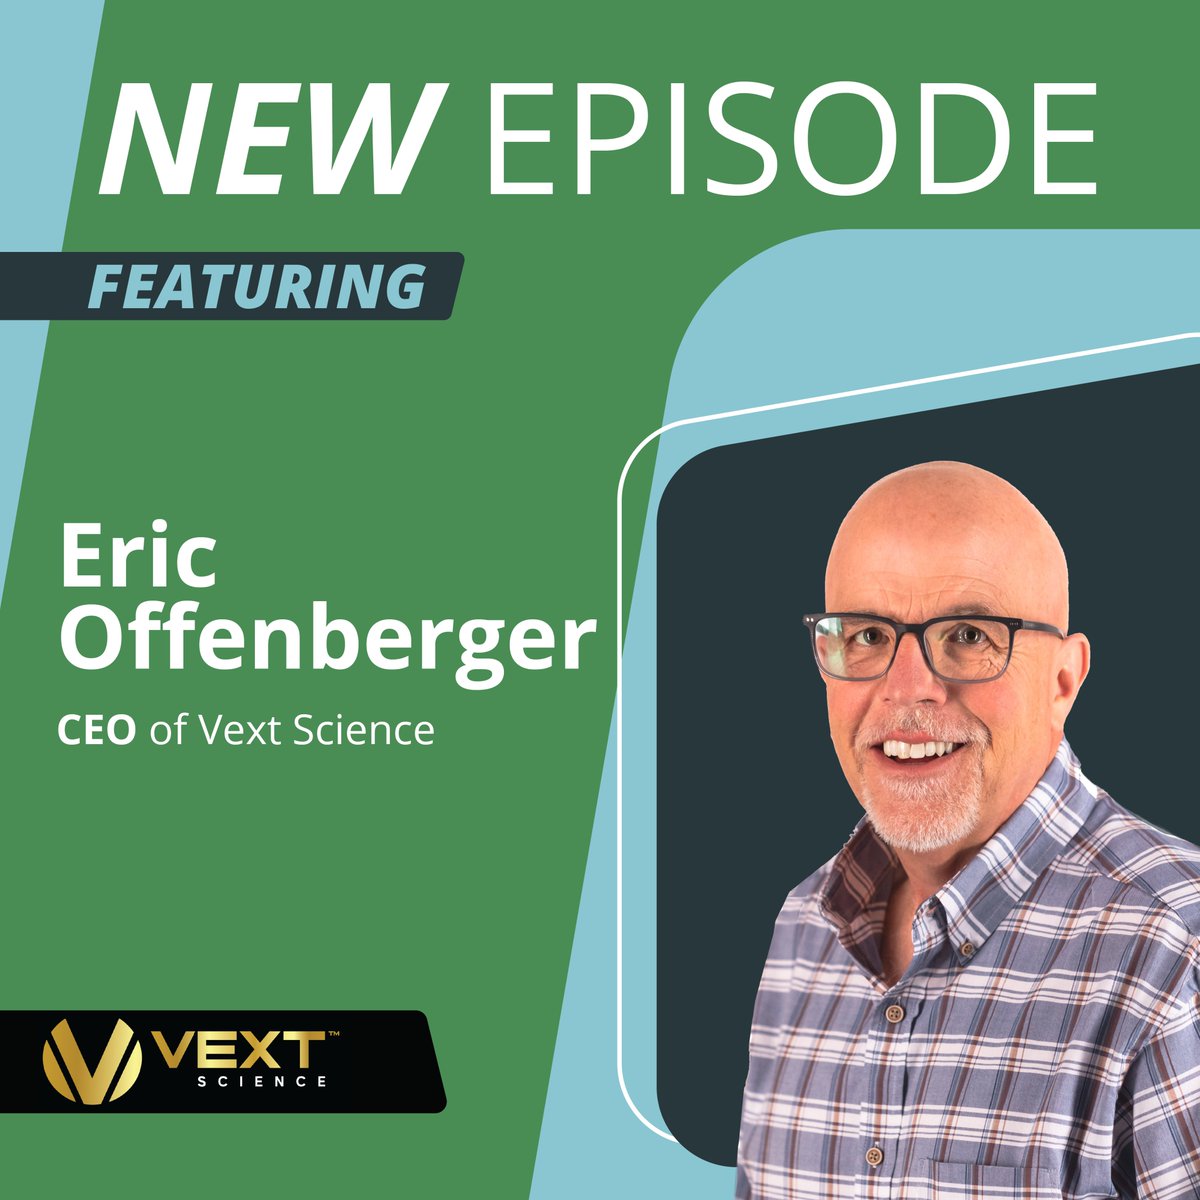 Our CEO was on @The_GreenRush Podcast to discuss #Arizona's cannabis market & the opportunity for $VEXT to grow in #Ohio. You can listen to it now. @AGDonohoe  @Nopich greenrushpodcast.net